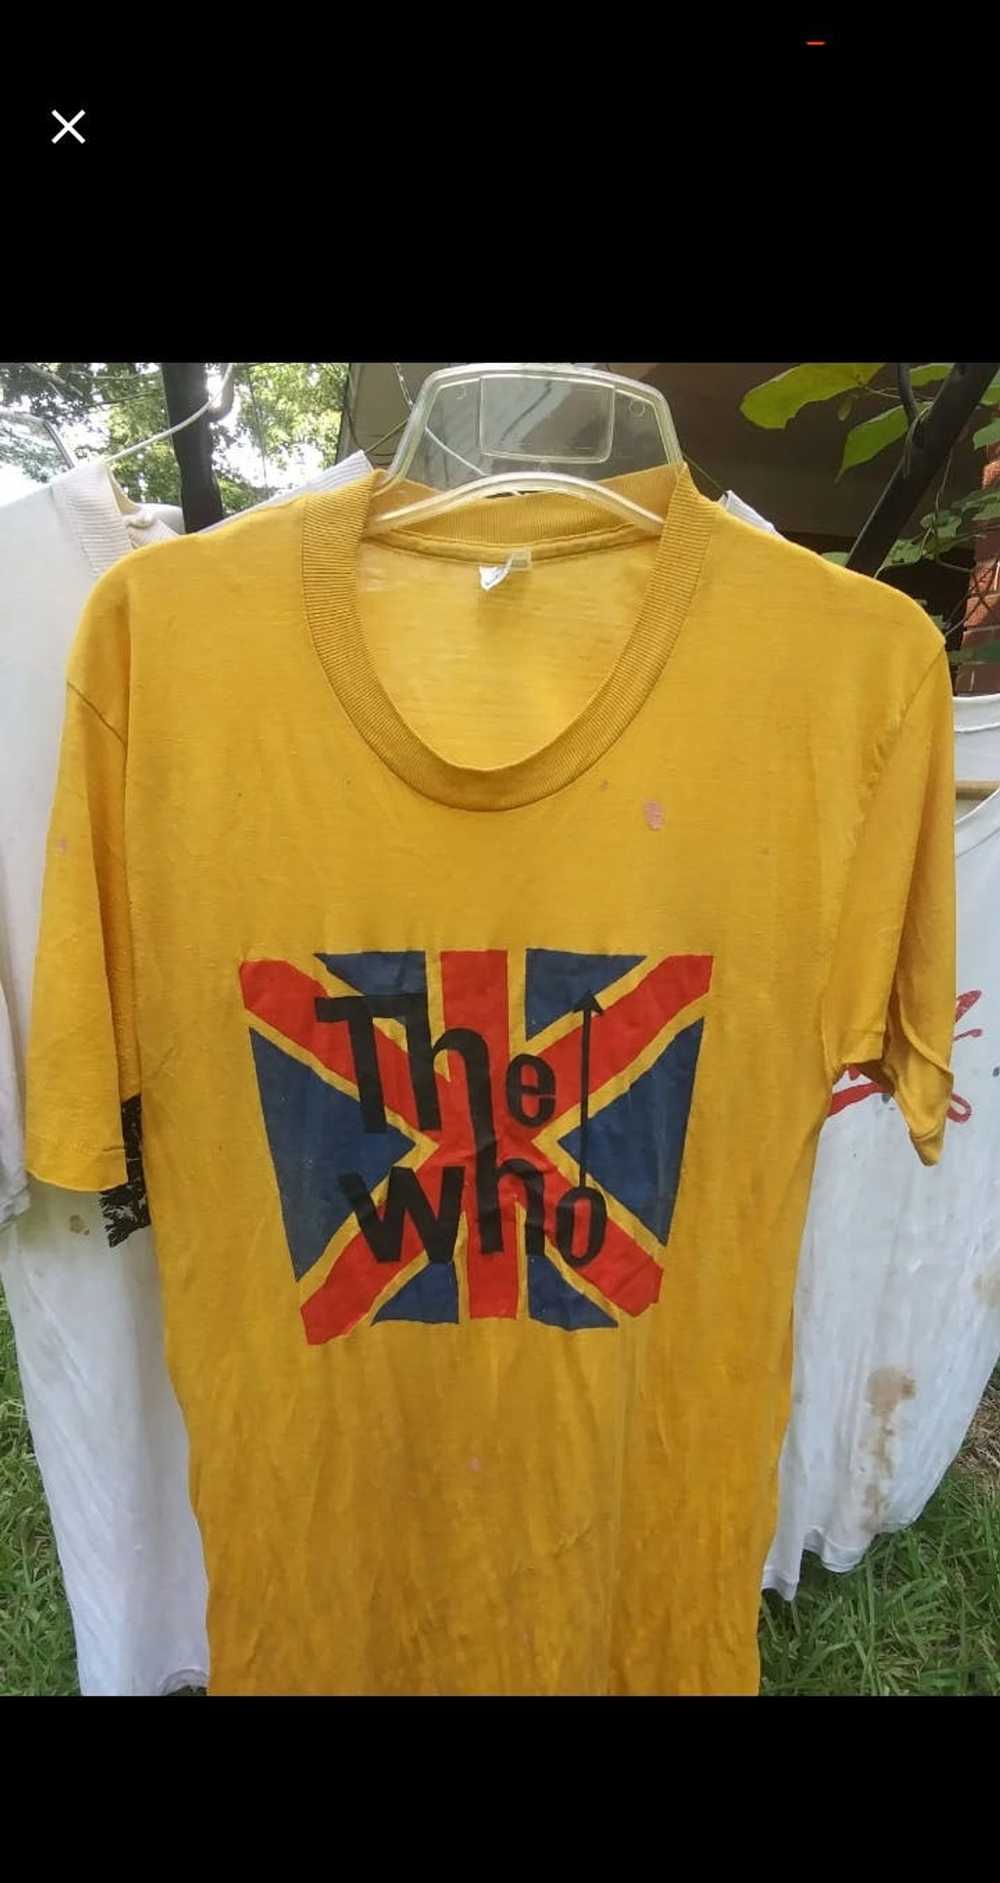 Vintage 1970s concert tee the who - image 1